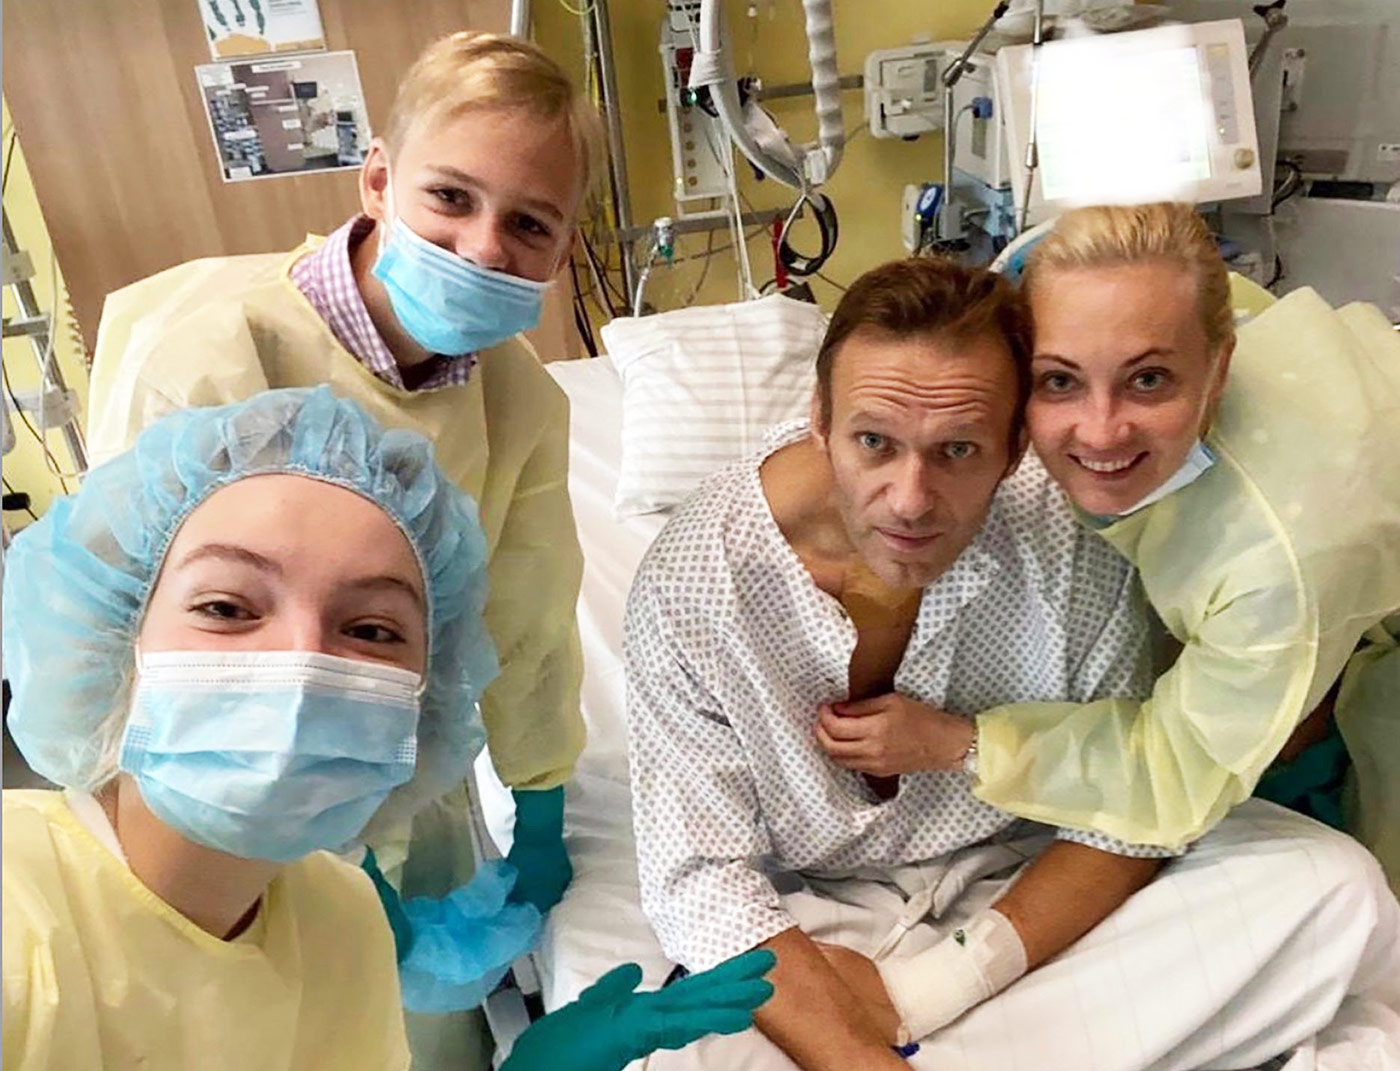 Navalny pictured with his family after treatment for the Novichok poisoning at Charite Hospital, Berlin, Germany - 15 Sep 2020